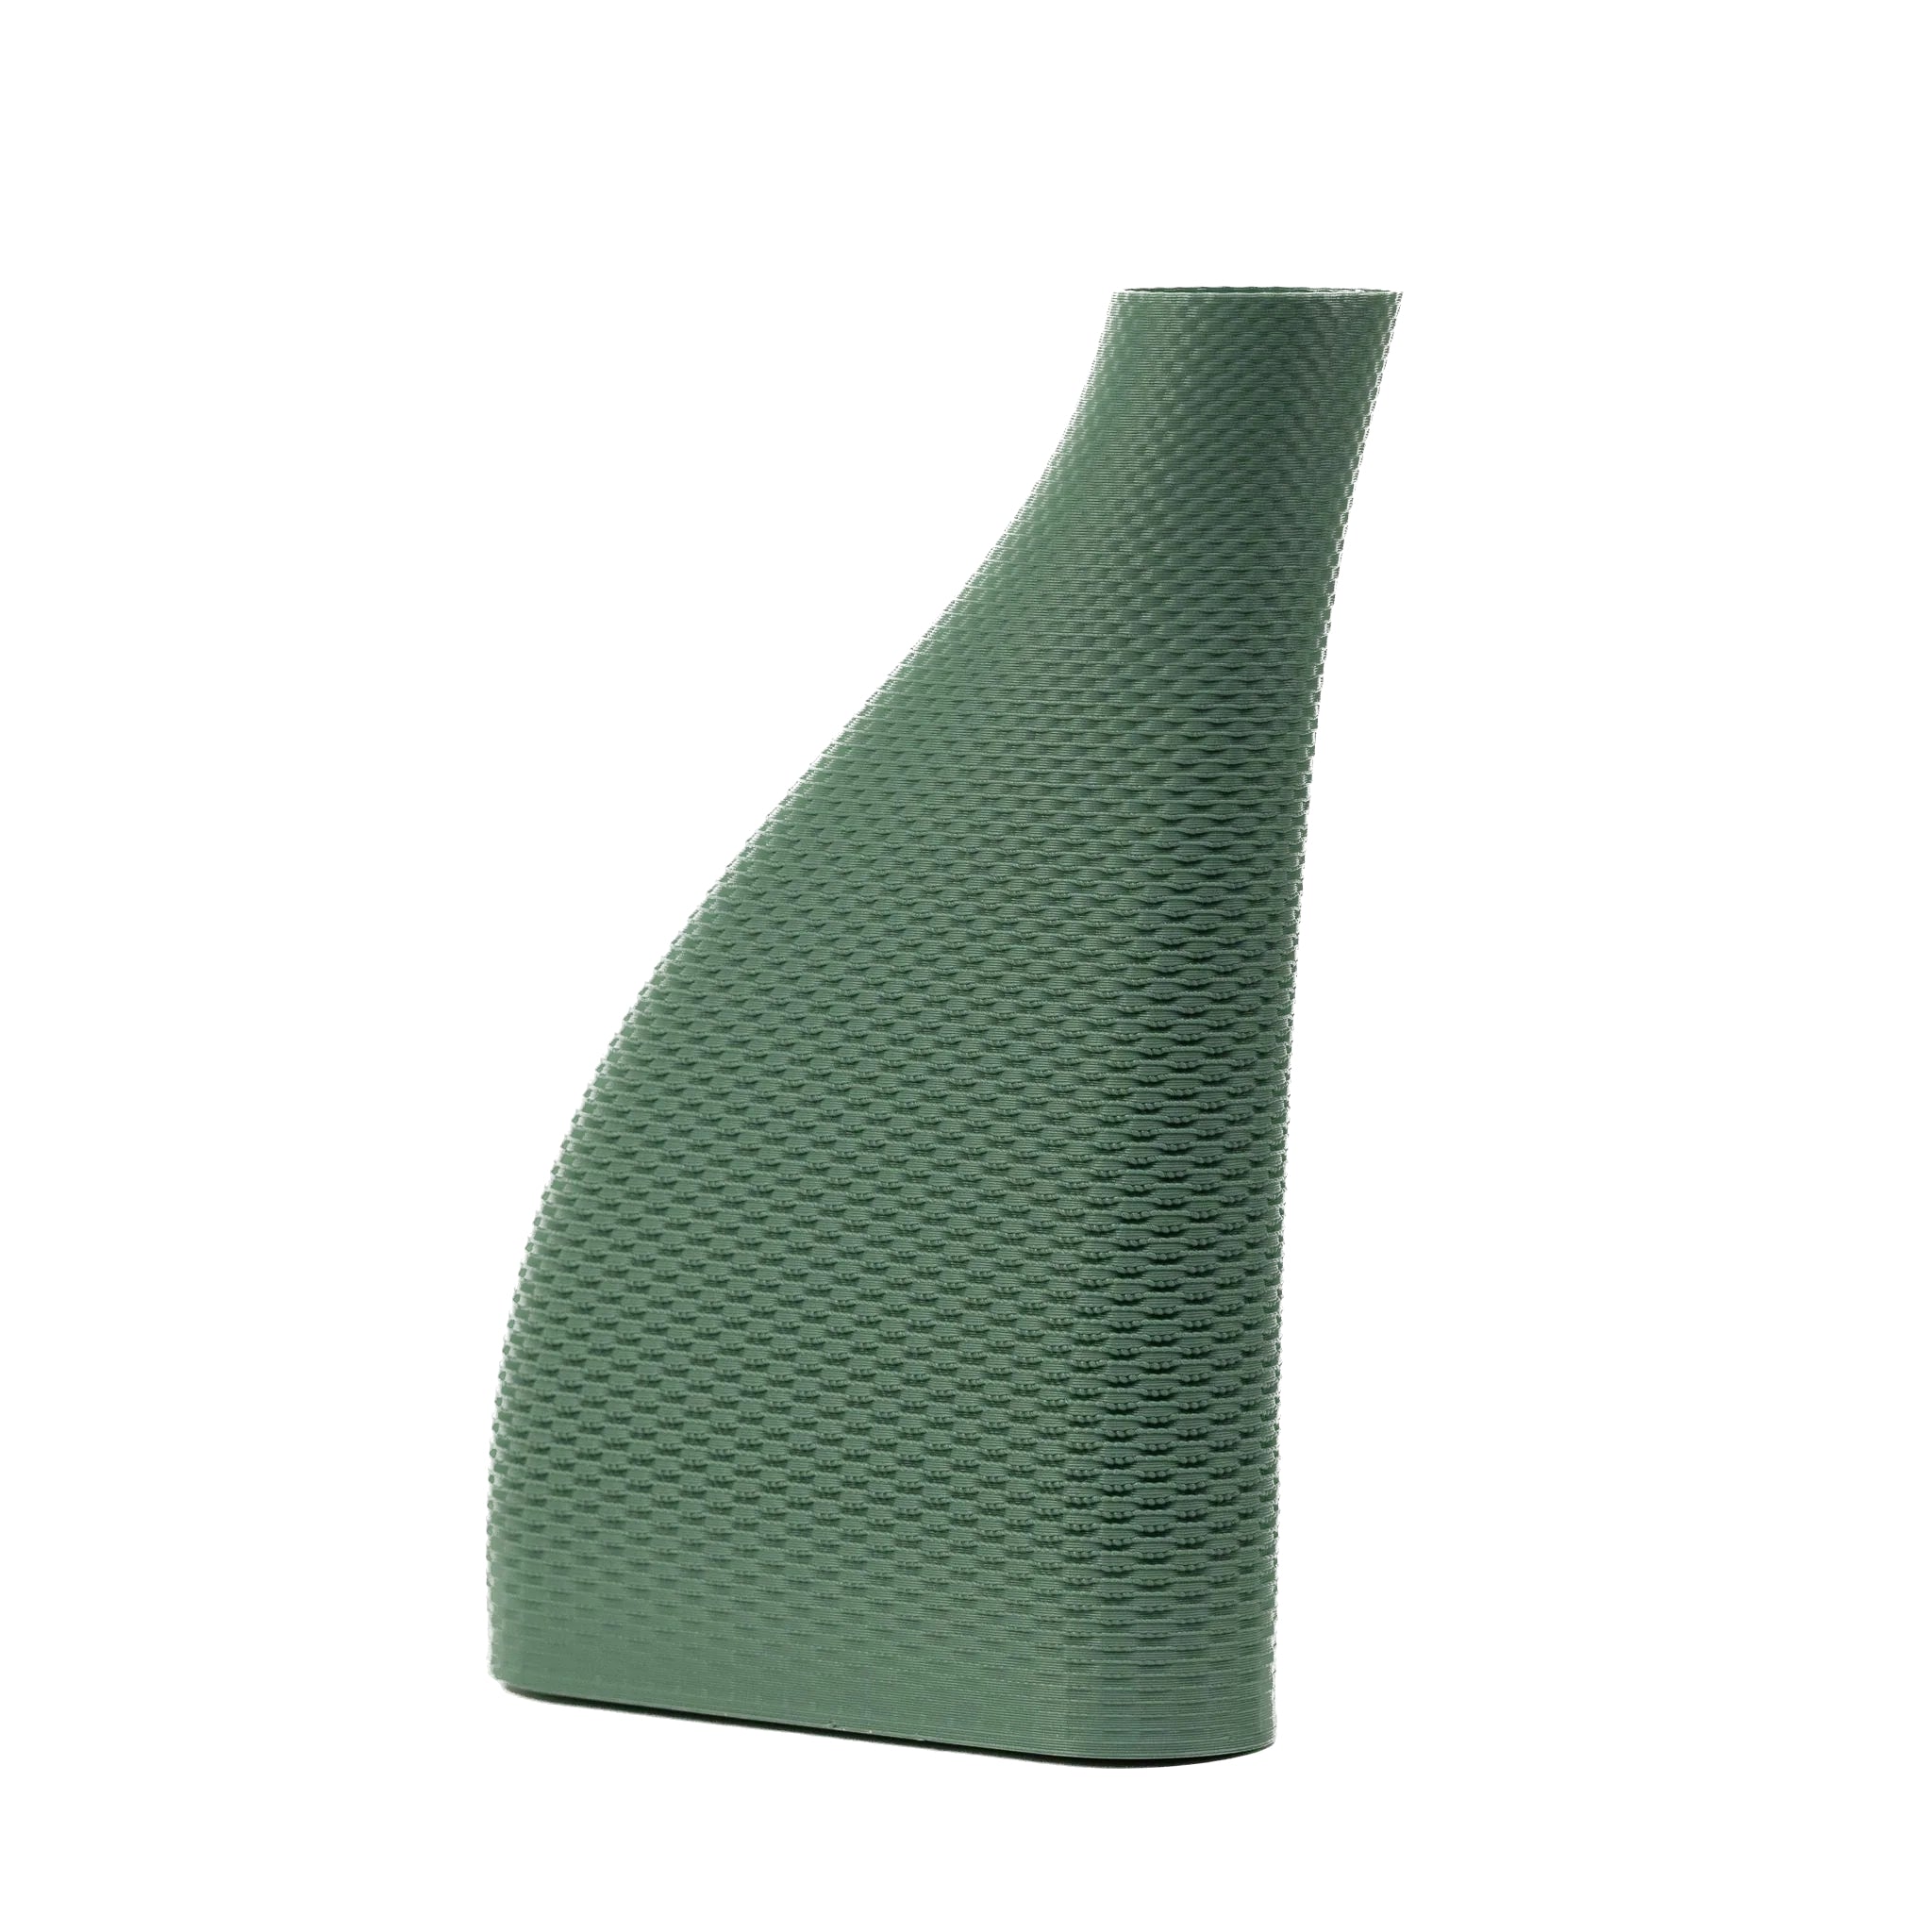 An angled view of Cyrc wicker vase in green. 3D printed recycled plastic. Product placed in front of a white background